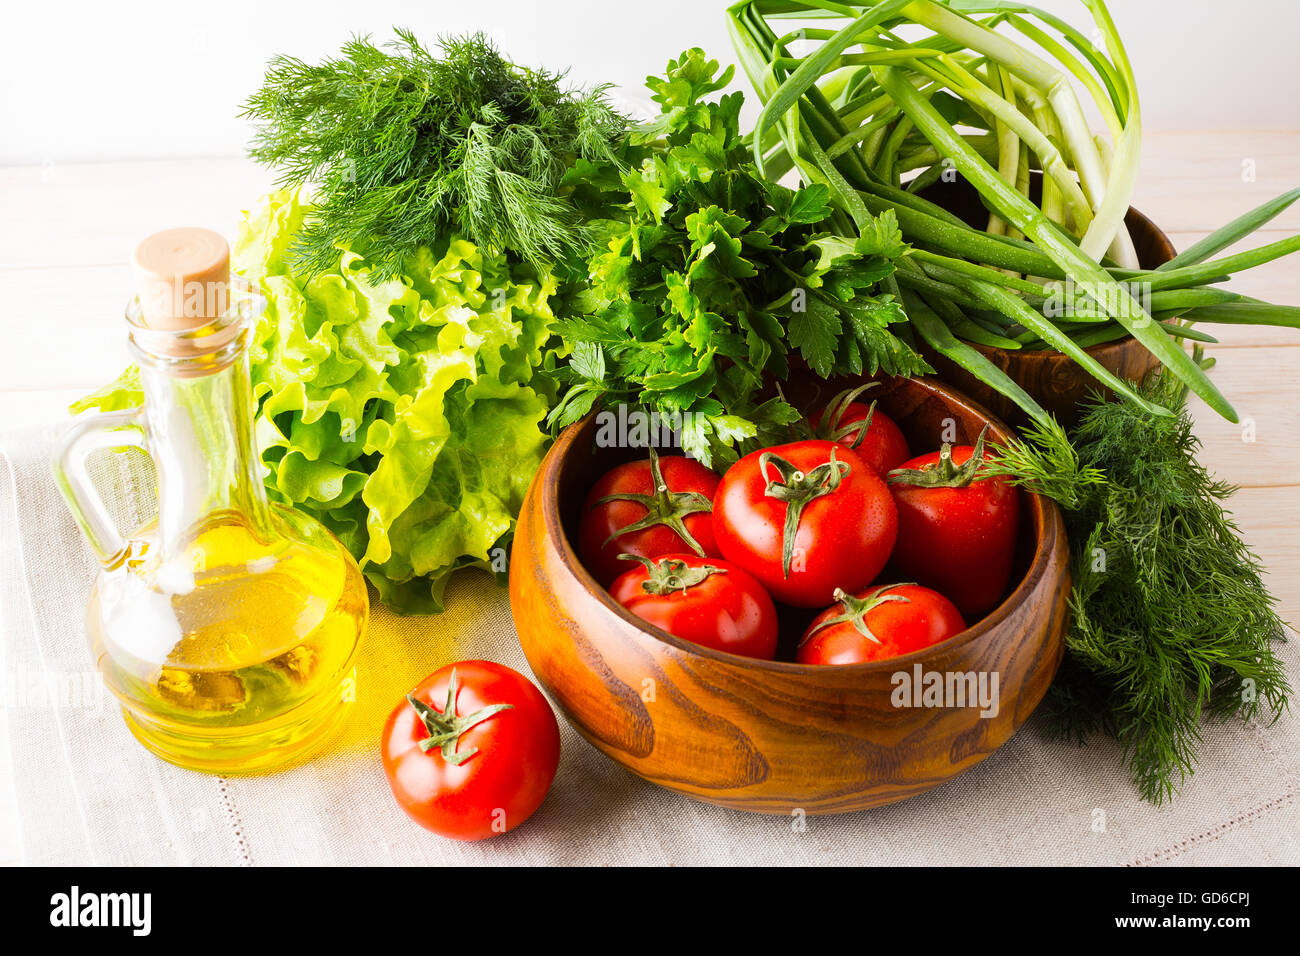 Olive oil, garlic and tomato in wooden bowl.. Healthy eating concept with fresh vegetables. Vegetarian  vegan food. Stock Photo